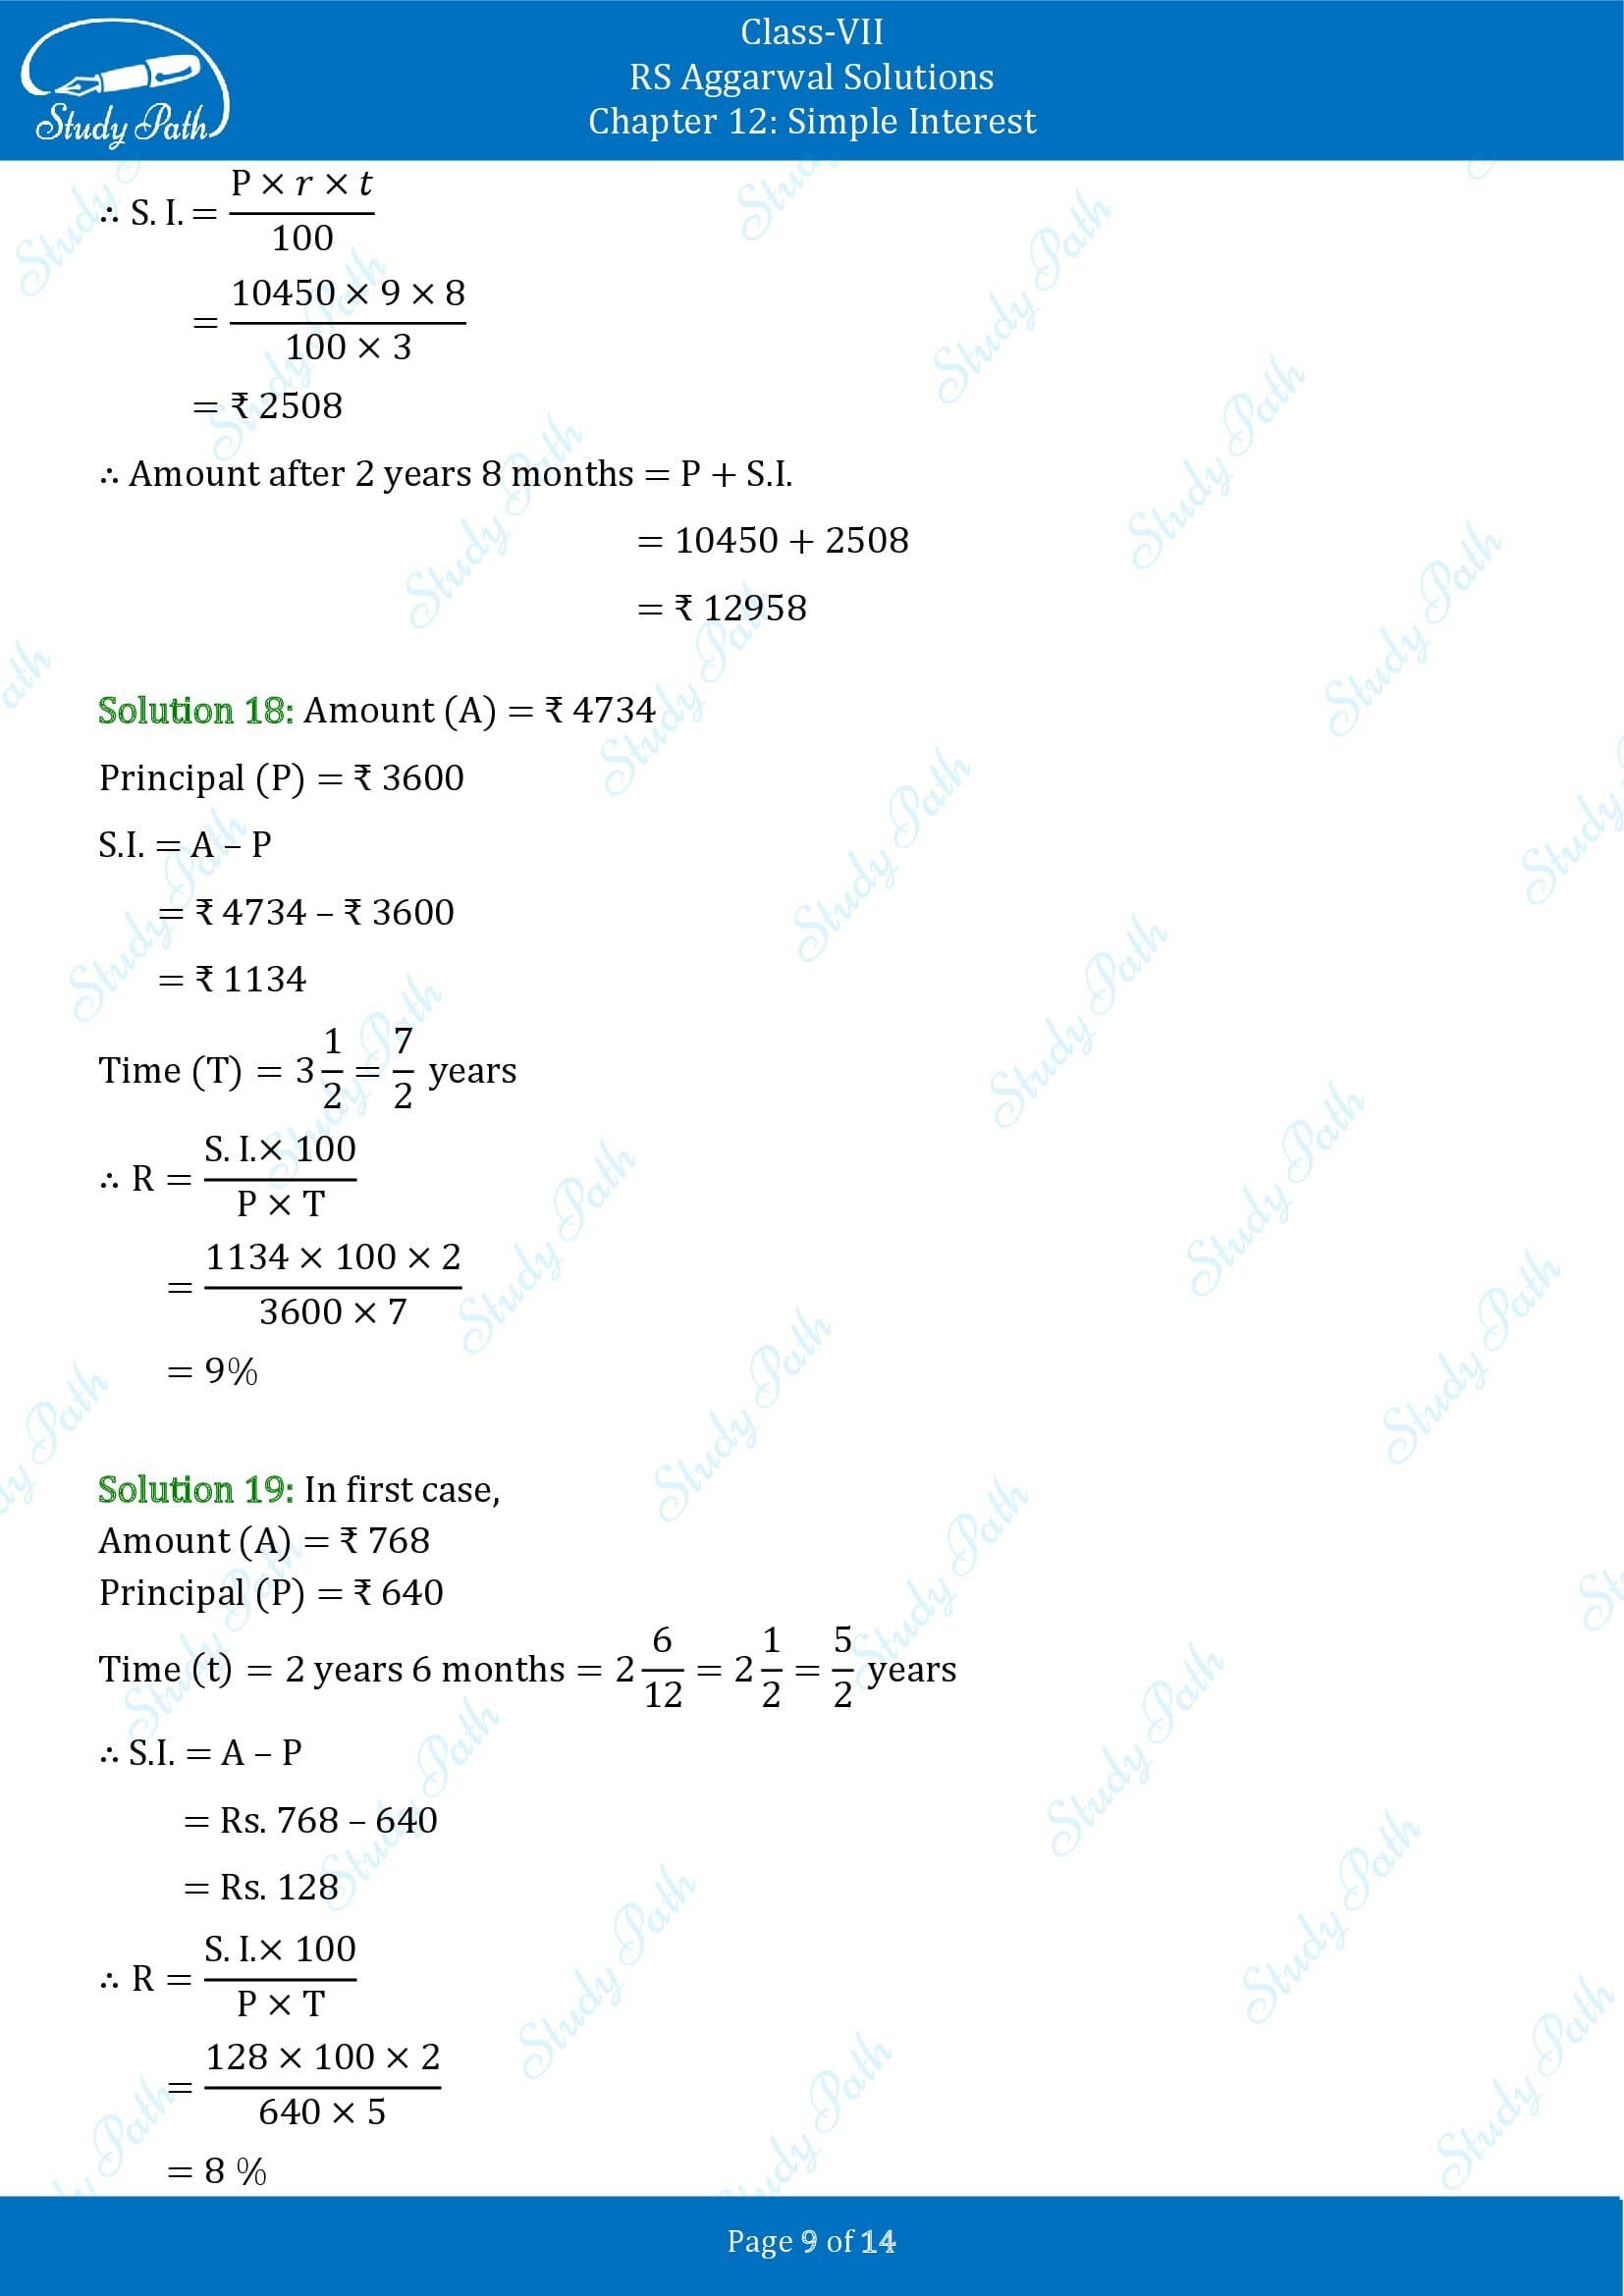 RS Aggarwal Solutions Class 7 Chapter 12 Simple Interest Exercise 12A 00009